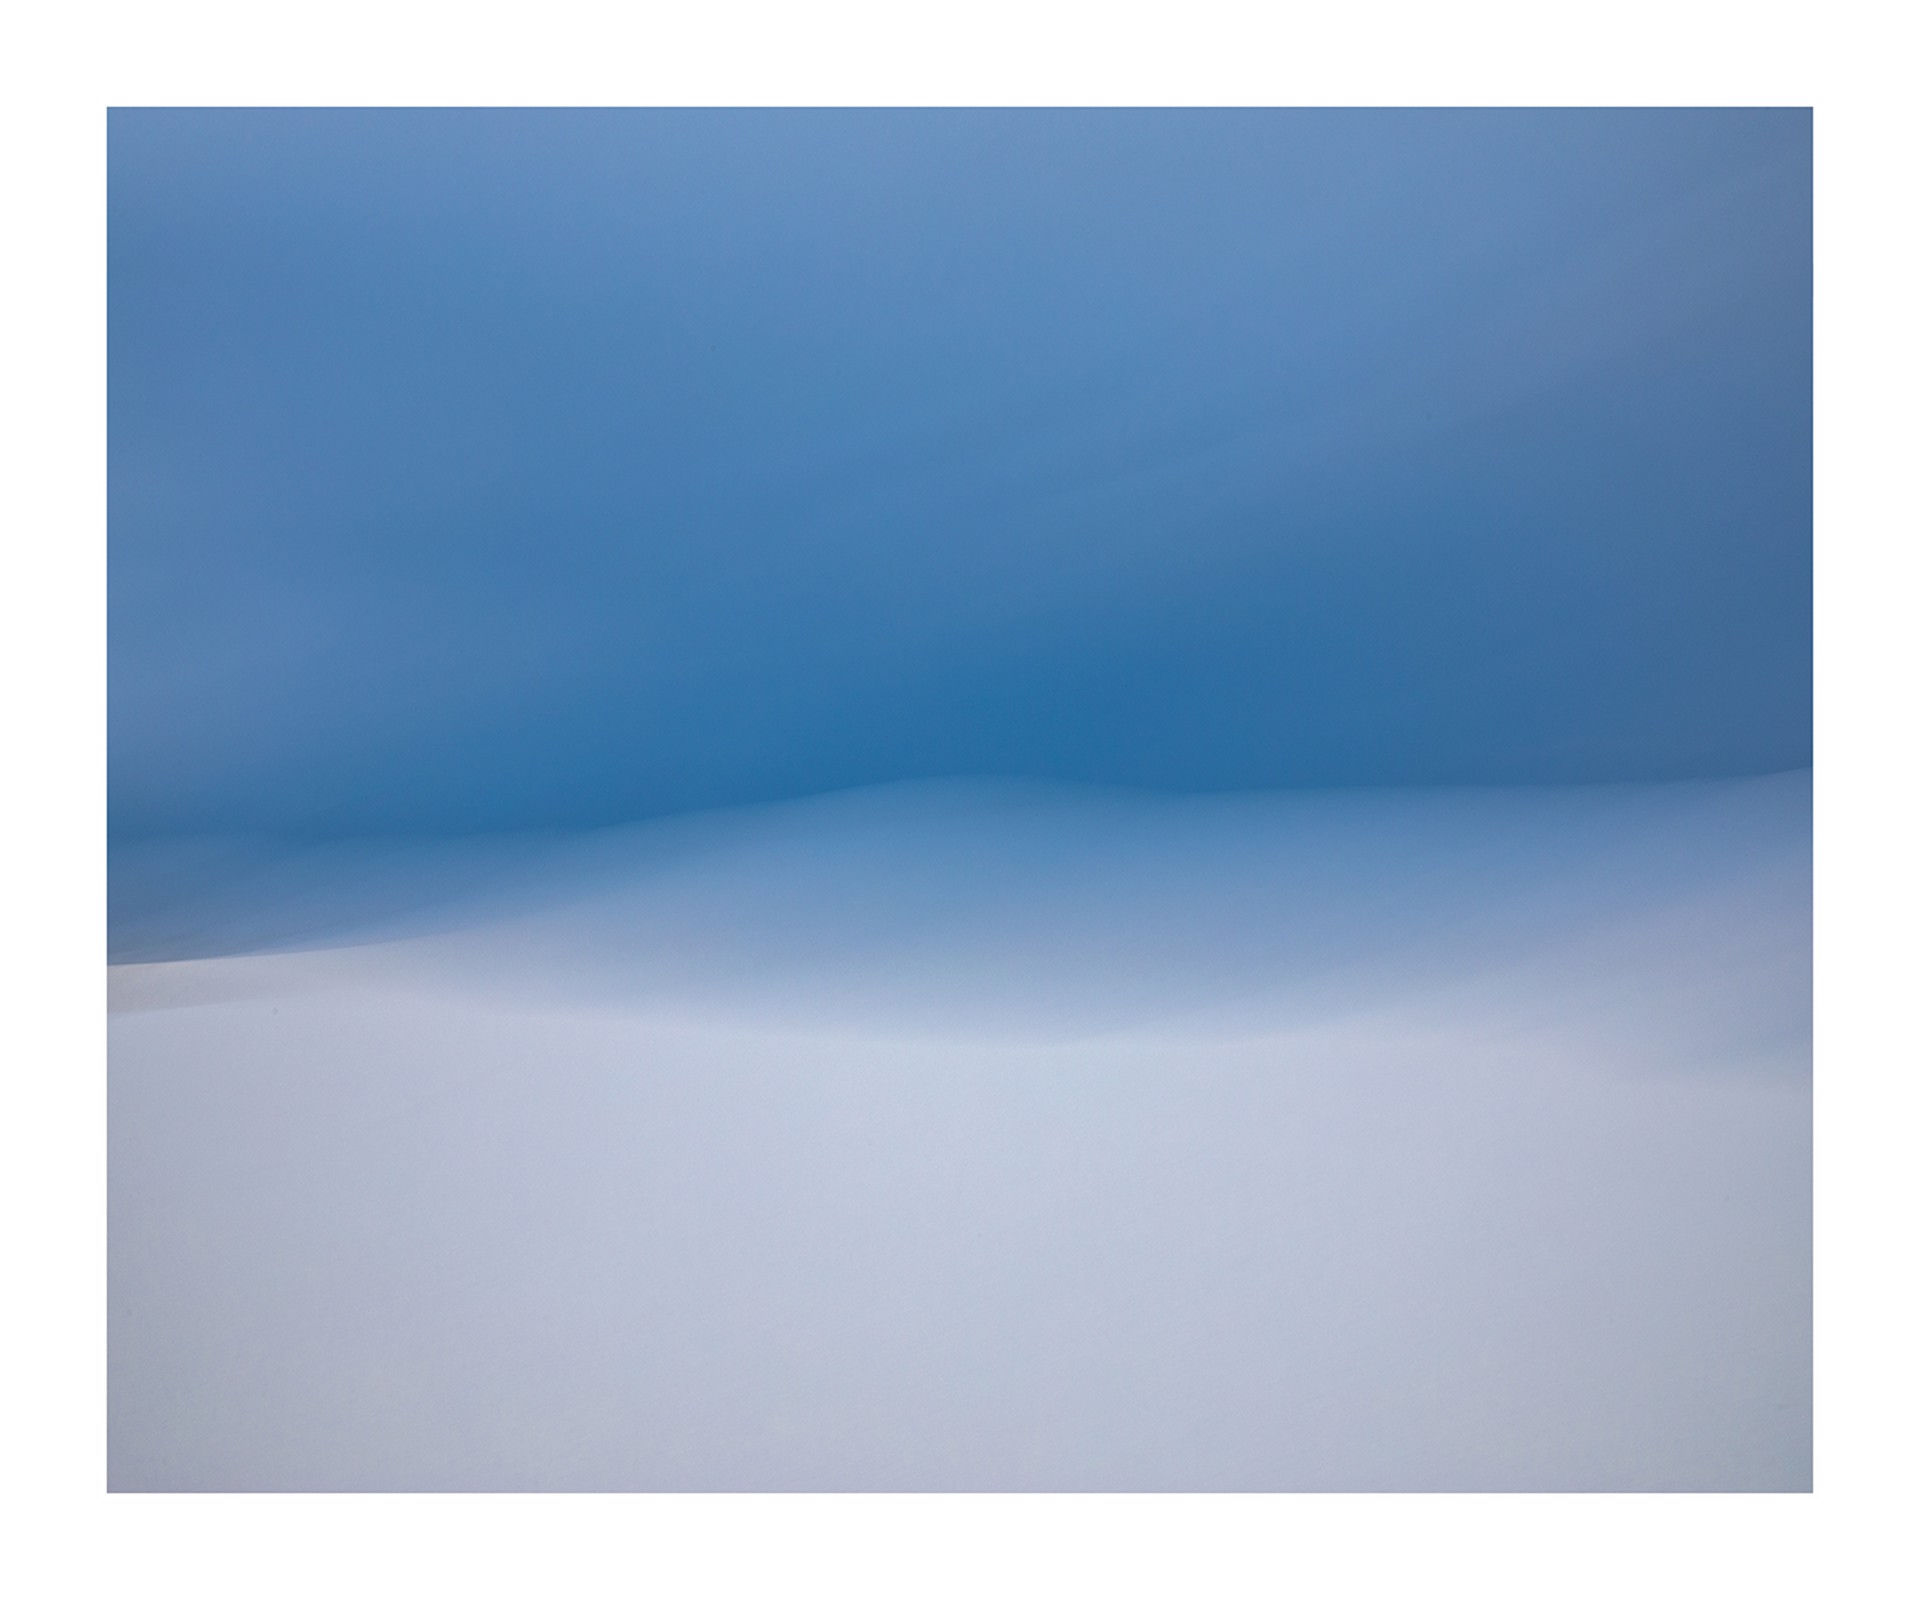 White Sands 1 by ROB LANG